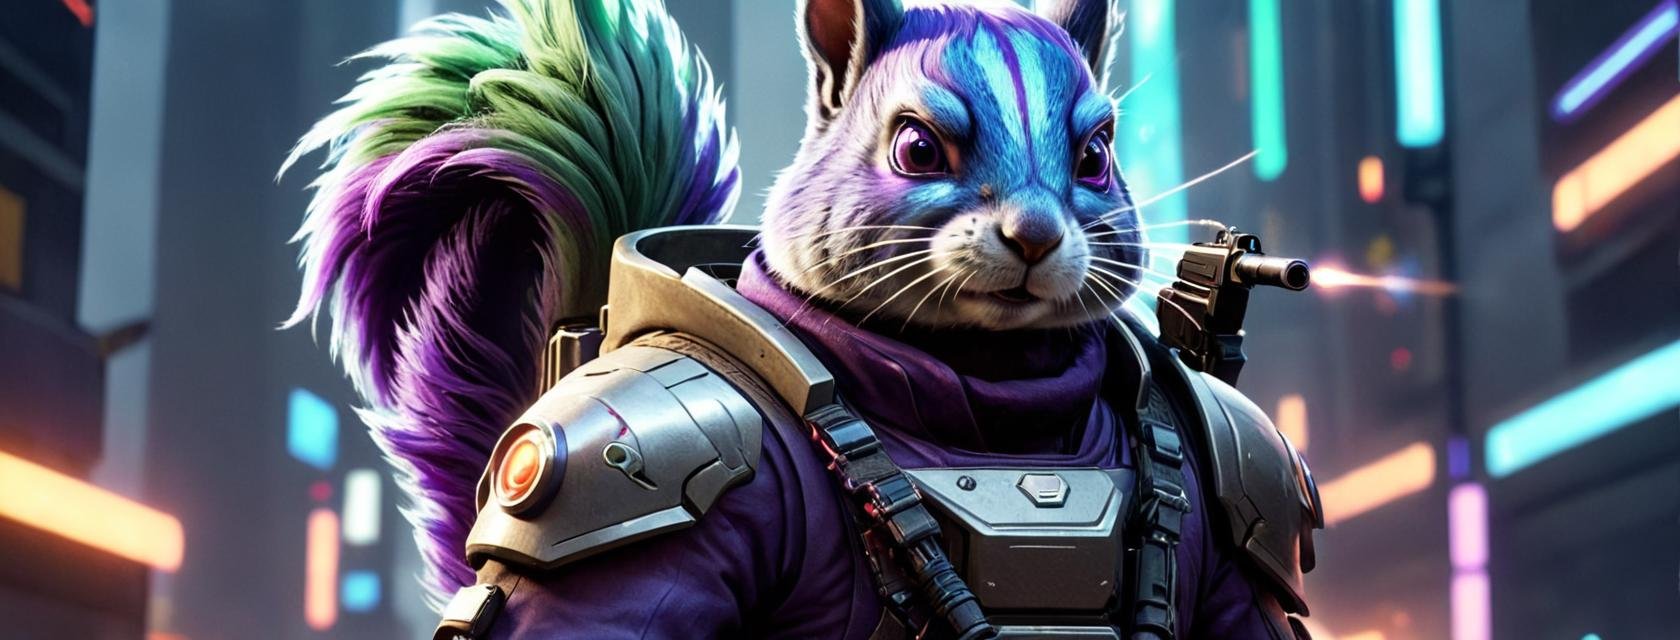 Hyperrealistic art [X], cyber punk 2077, [B] <lora:Cyber BunnY Warfare FFusion:1> a squirrel with purple hair wearing a futuristic outfitwith dreadlocks holding a gun, cyberpunk 8 k, holding a lightsabre. splash art, with green hair in a futuristic suit, shadowrun character art, cyberpunk dyed haircut, very beautiful cyberpunk samurai, trending on artstation hd, portrait beautiful sci - fi, a with blue hair in a futuristic city, cyberpunk art ultrarealistic 8k, a man holding a gun in front of a fire, apex legends character . Extremely high-resolution details, photographic, realism pushed to extreme, fine texture, incredibly lifelike . Extremely high-resolution details, photographic, realism pushed to extreme, fine texture, incredibly lifelike